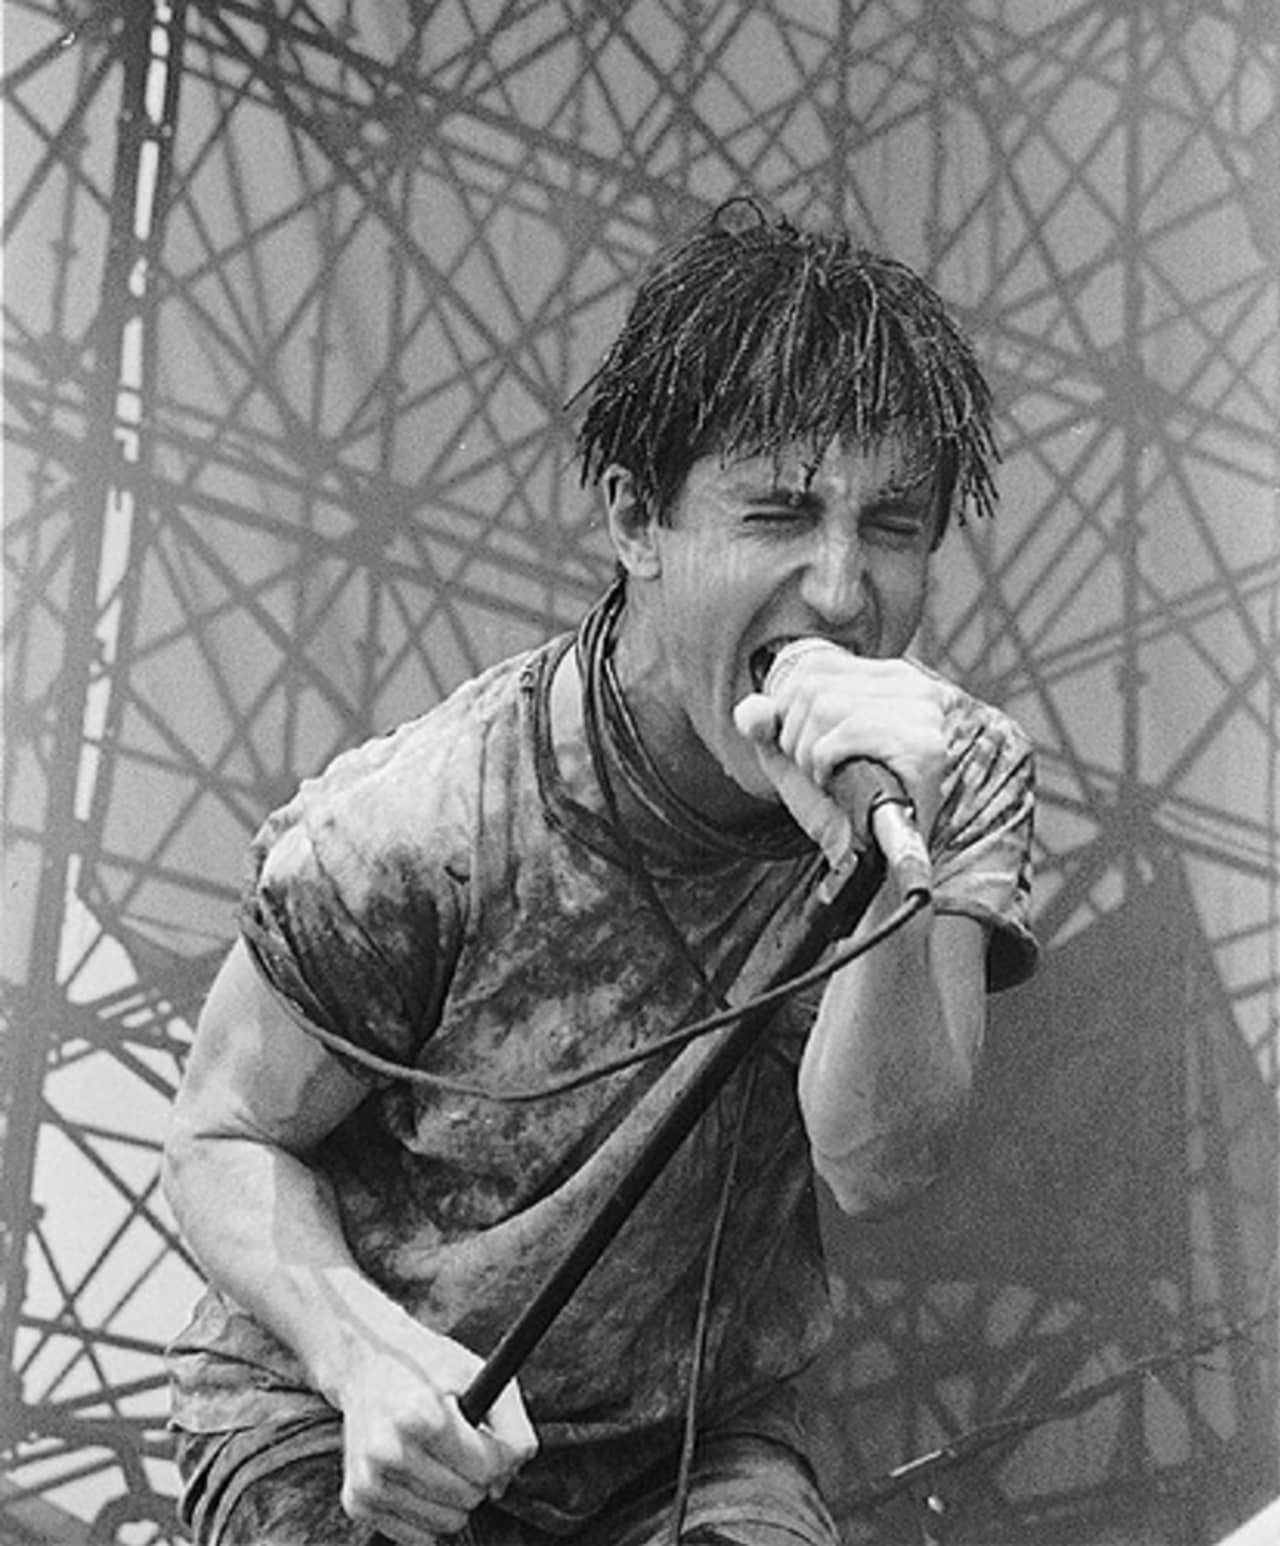 Nine Inch Nails' Trent Reznor, during a live performance in the inaugural Lollapalooza tour, in 1991. School of Rock students will pay homage to the tour in an upcoming performance.